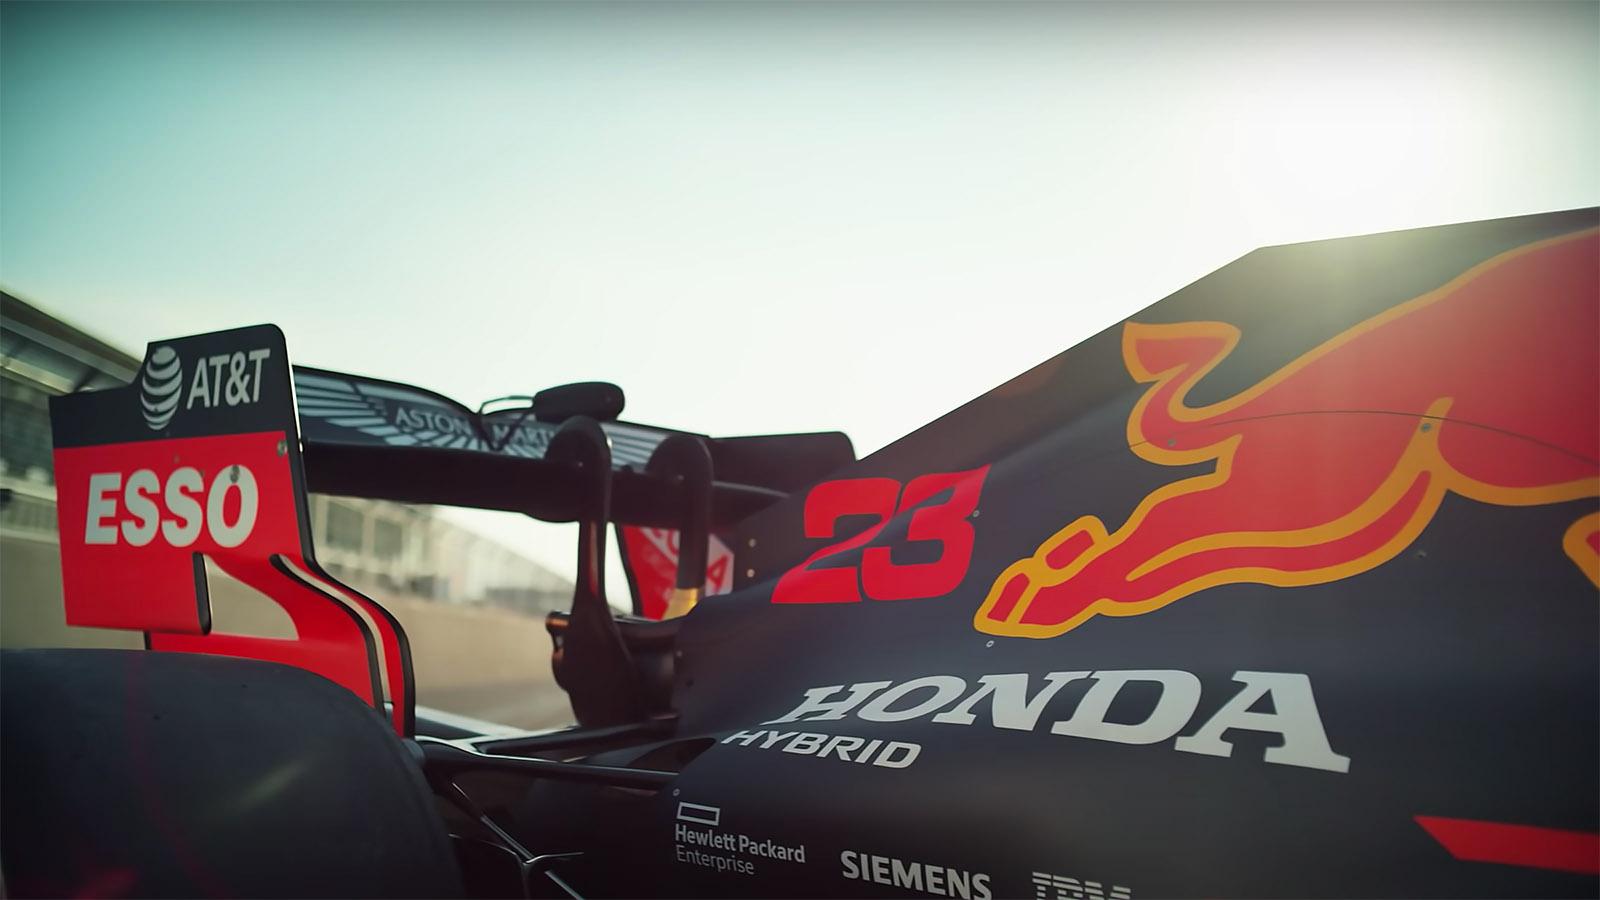 Rear wing of a Red Bull Racing F1 Car